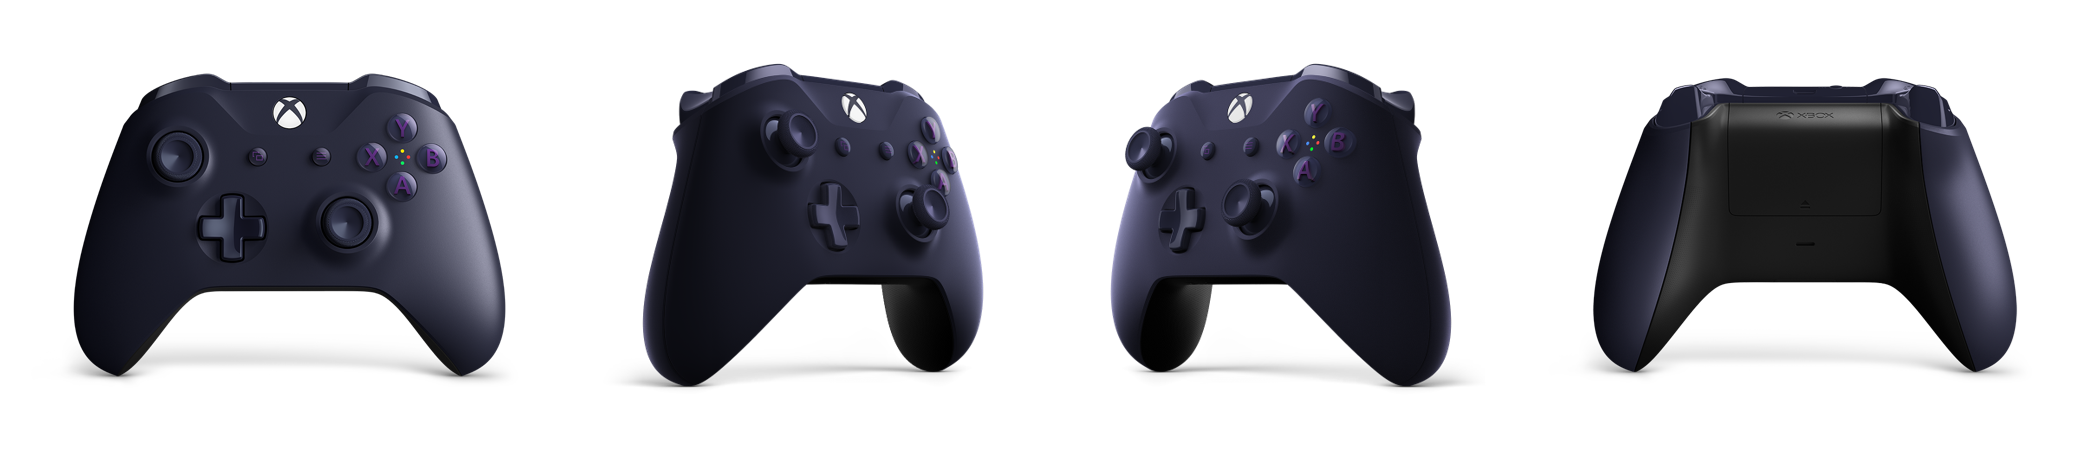 limited edition fortnite xbox one wireless controller